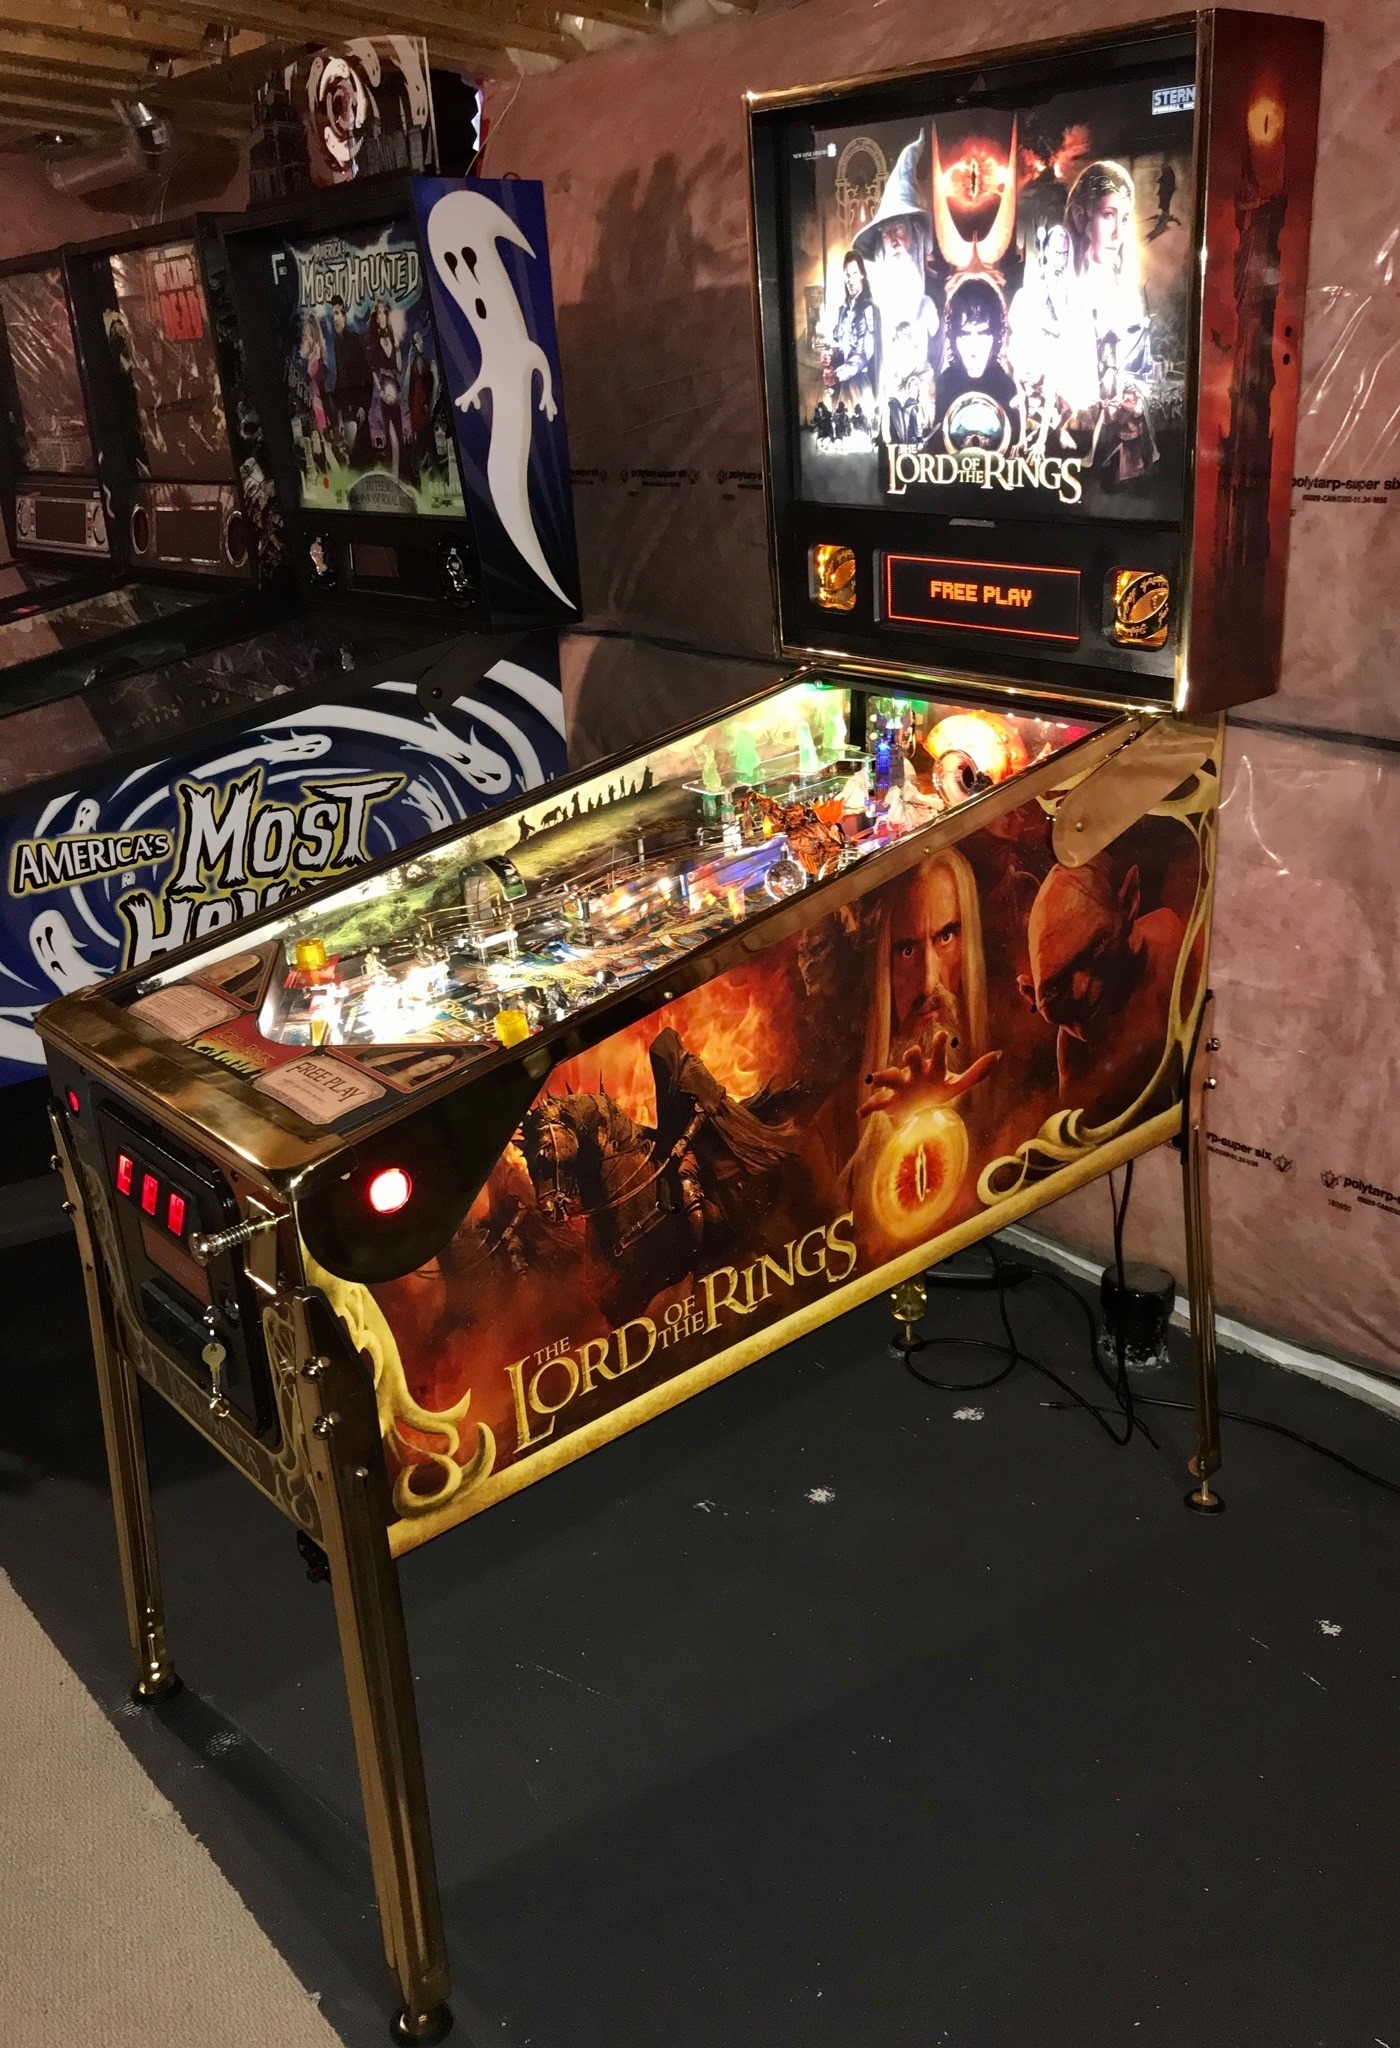 Azië eigendom hoe What We Know: Lord of the Rings Remake Rumors - This Week in Pinball